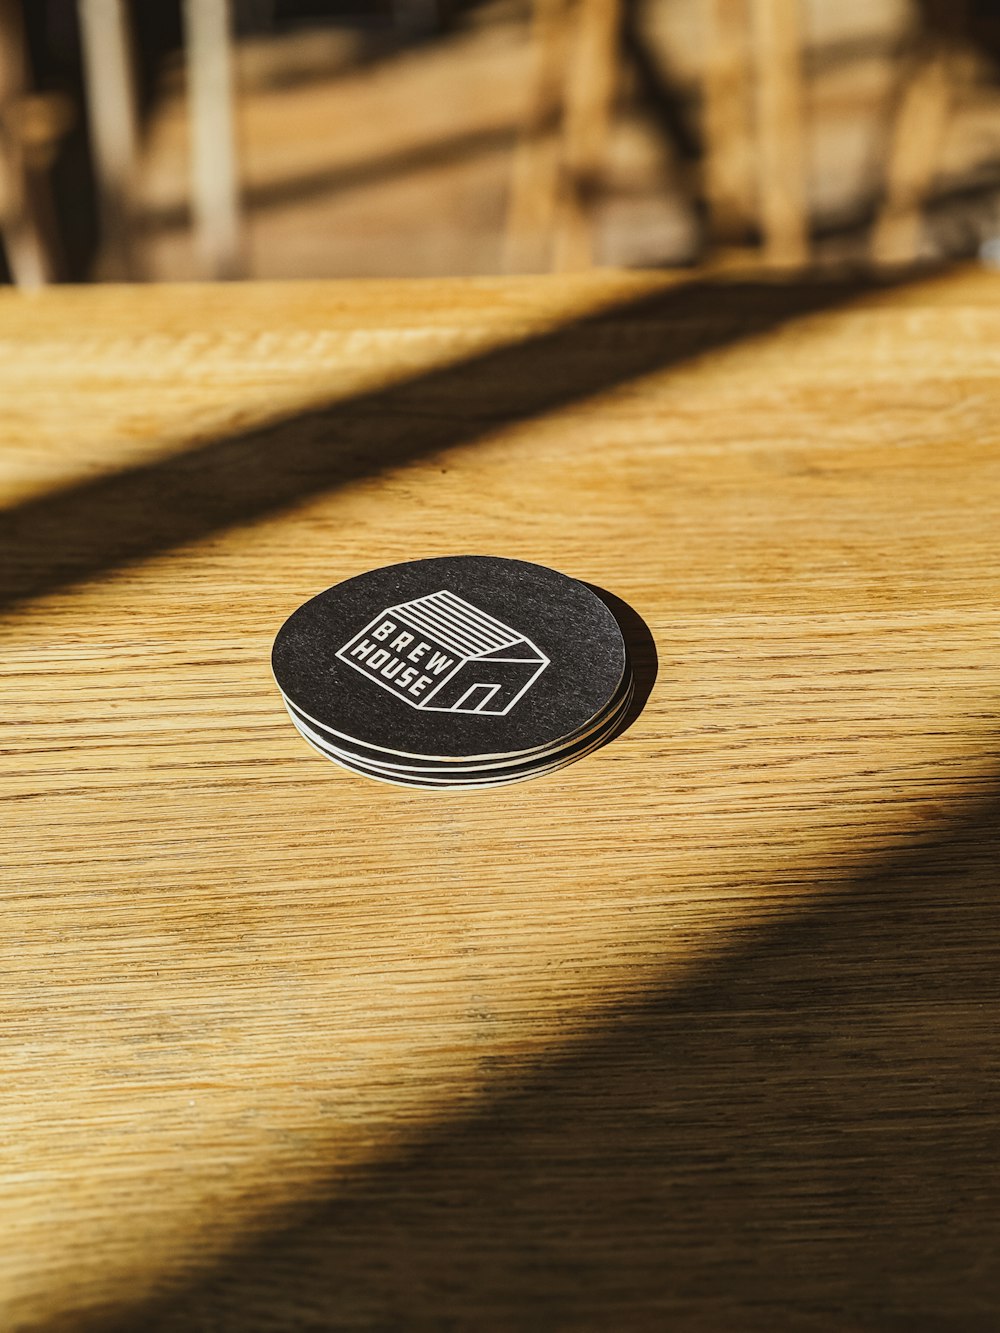 black and white round patch on brown wooden table